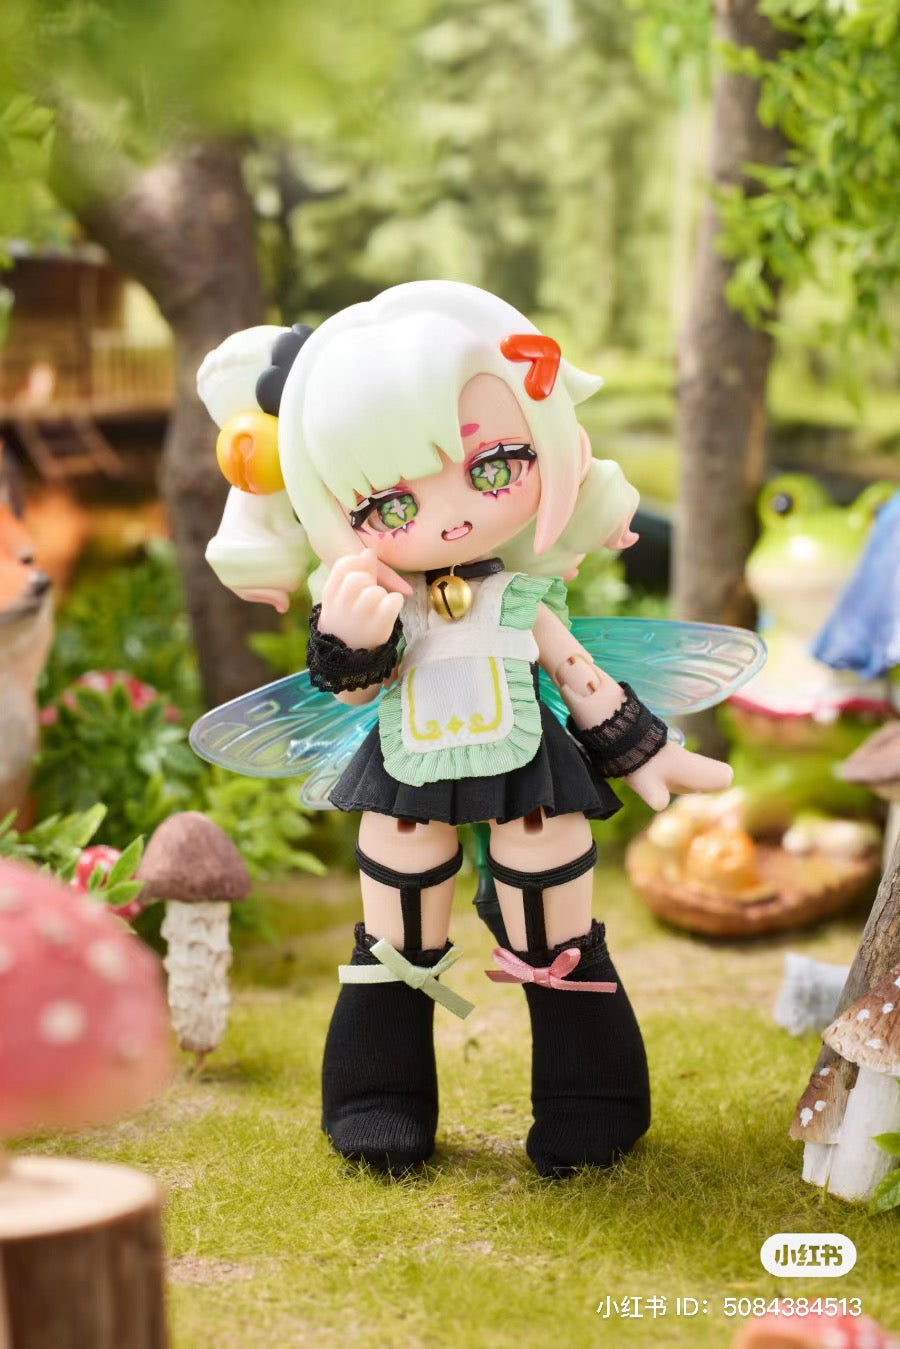 A toy doll and fairy figurine in a garden setting, part of the Kukaka Insect Cafe BJD Blind Box Series.